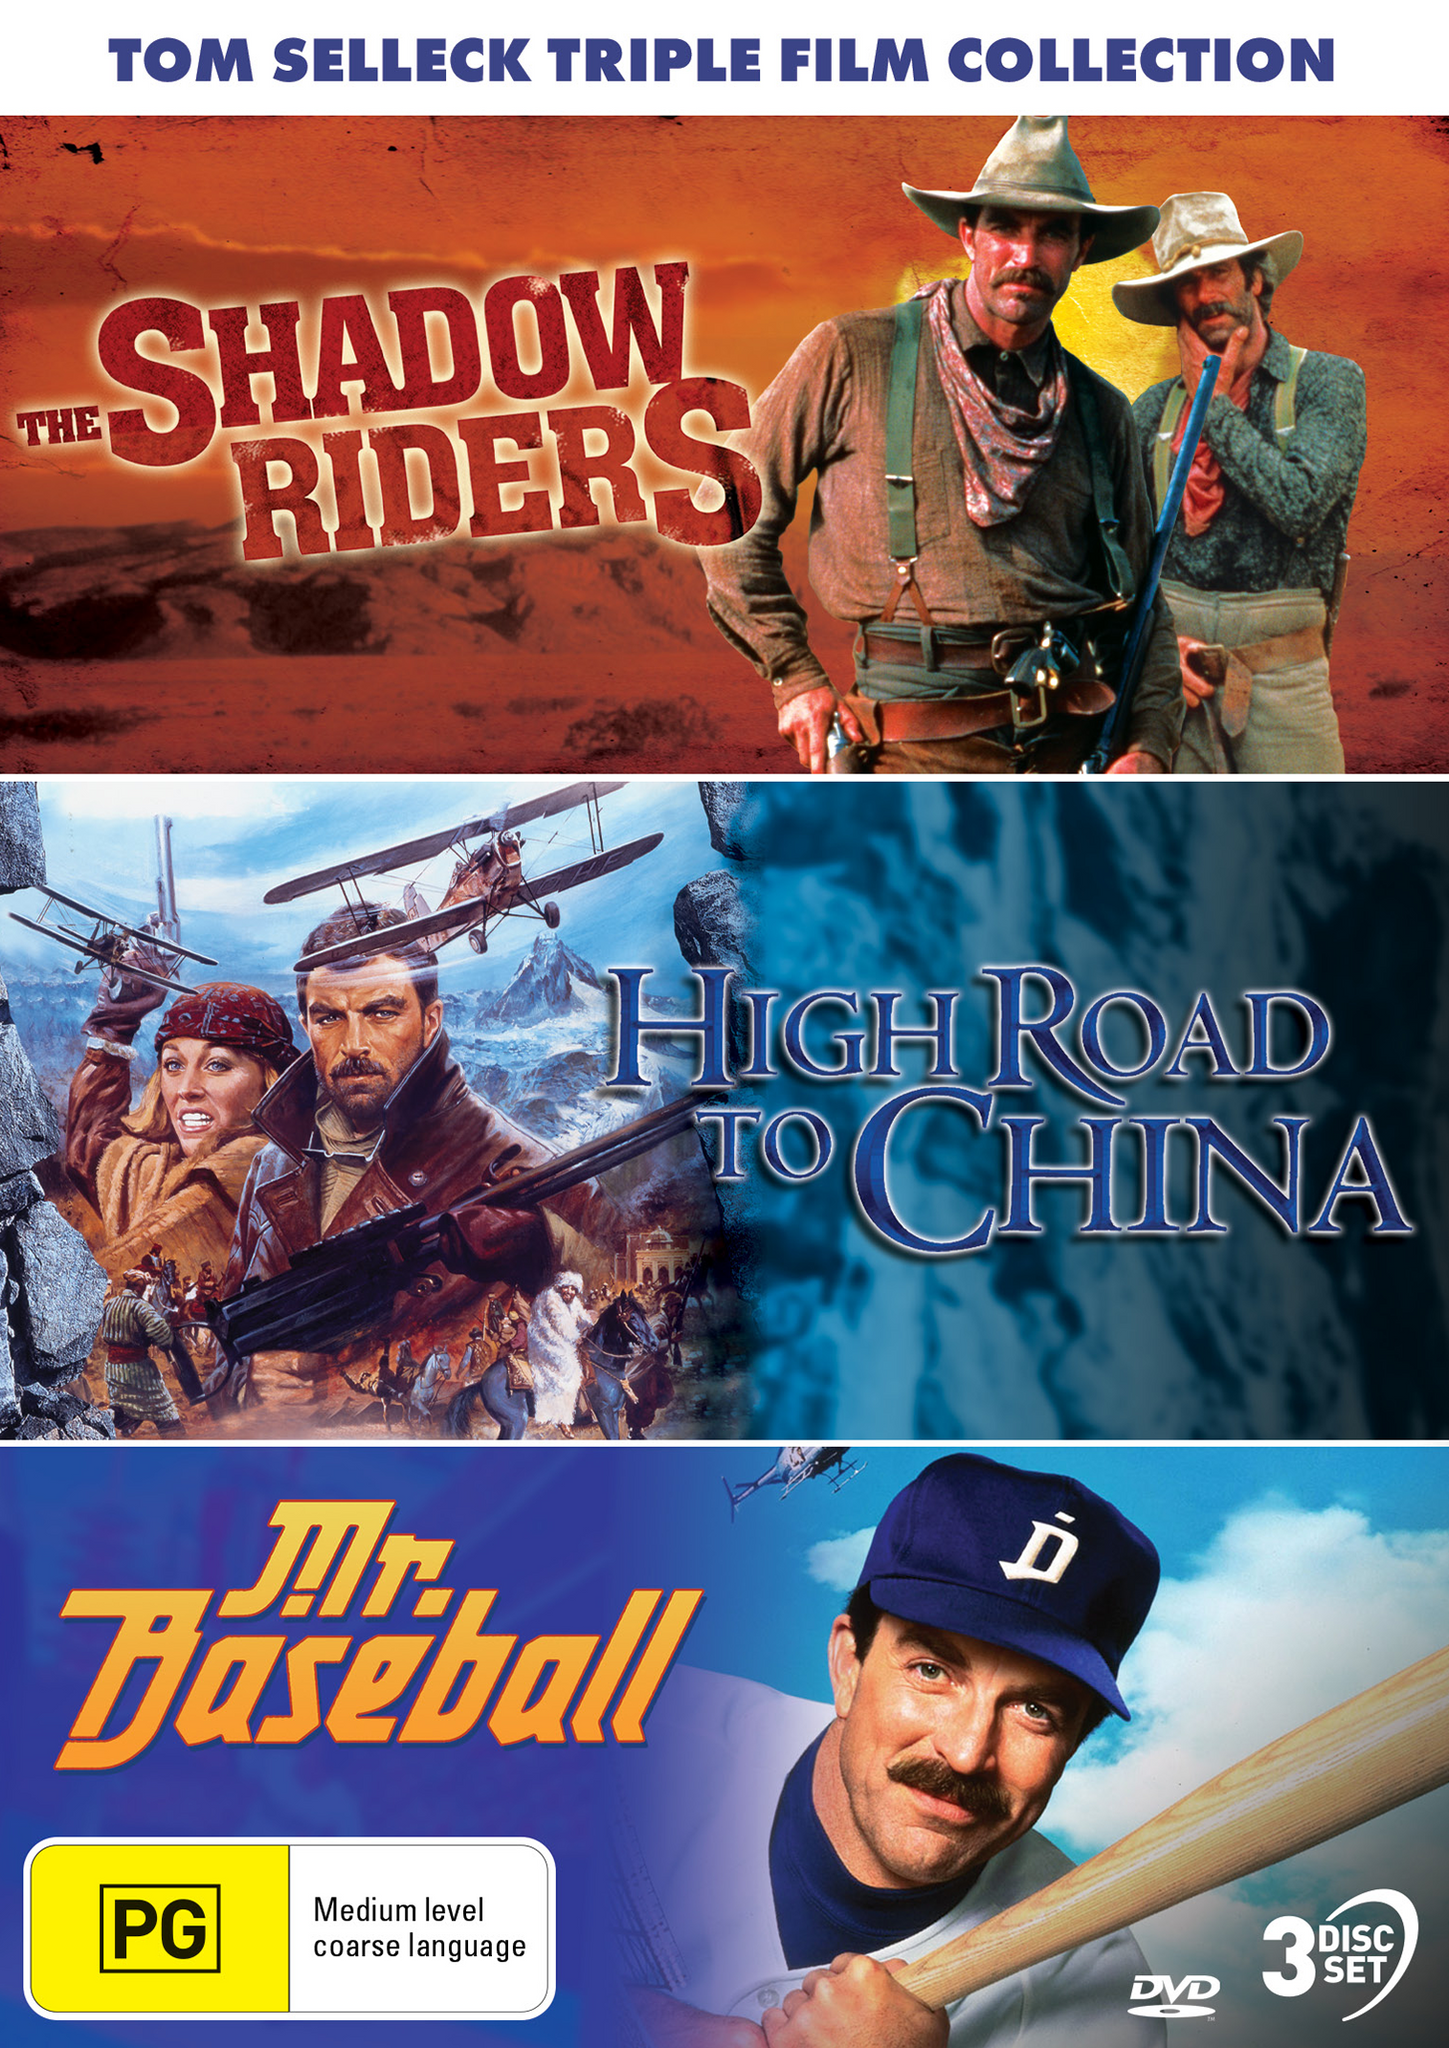 TOM SELLECK COLLECTION: THE SHADOW RIDERS / HIGH ROAD TO CHINA / MR. BASEBALL